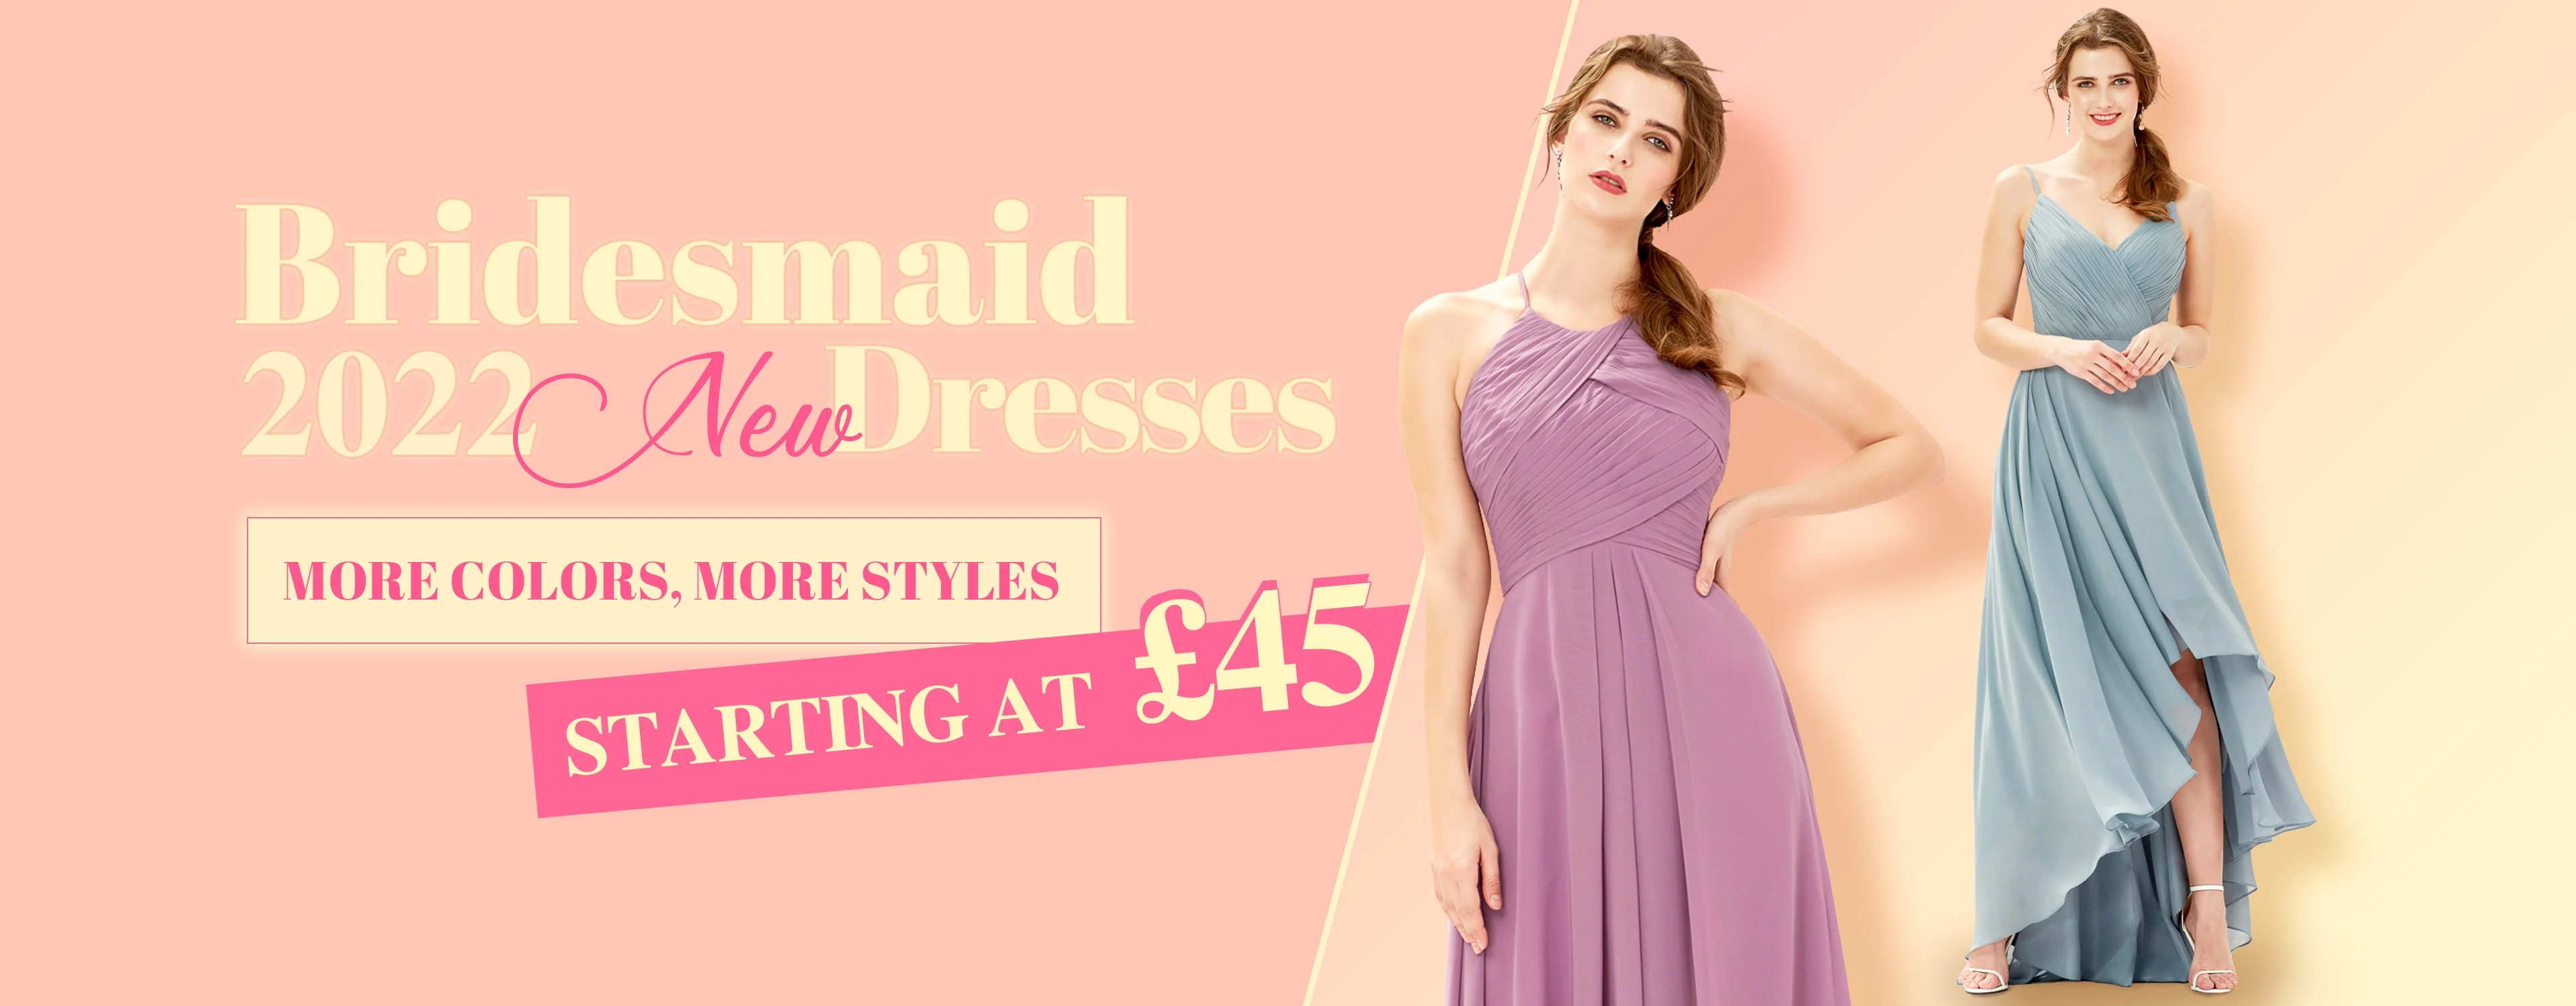 Looking For The Perfect Bridesmaid Dress? Check Our Pinterest Page!